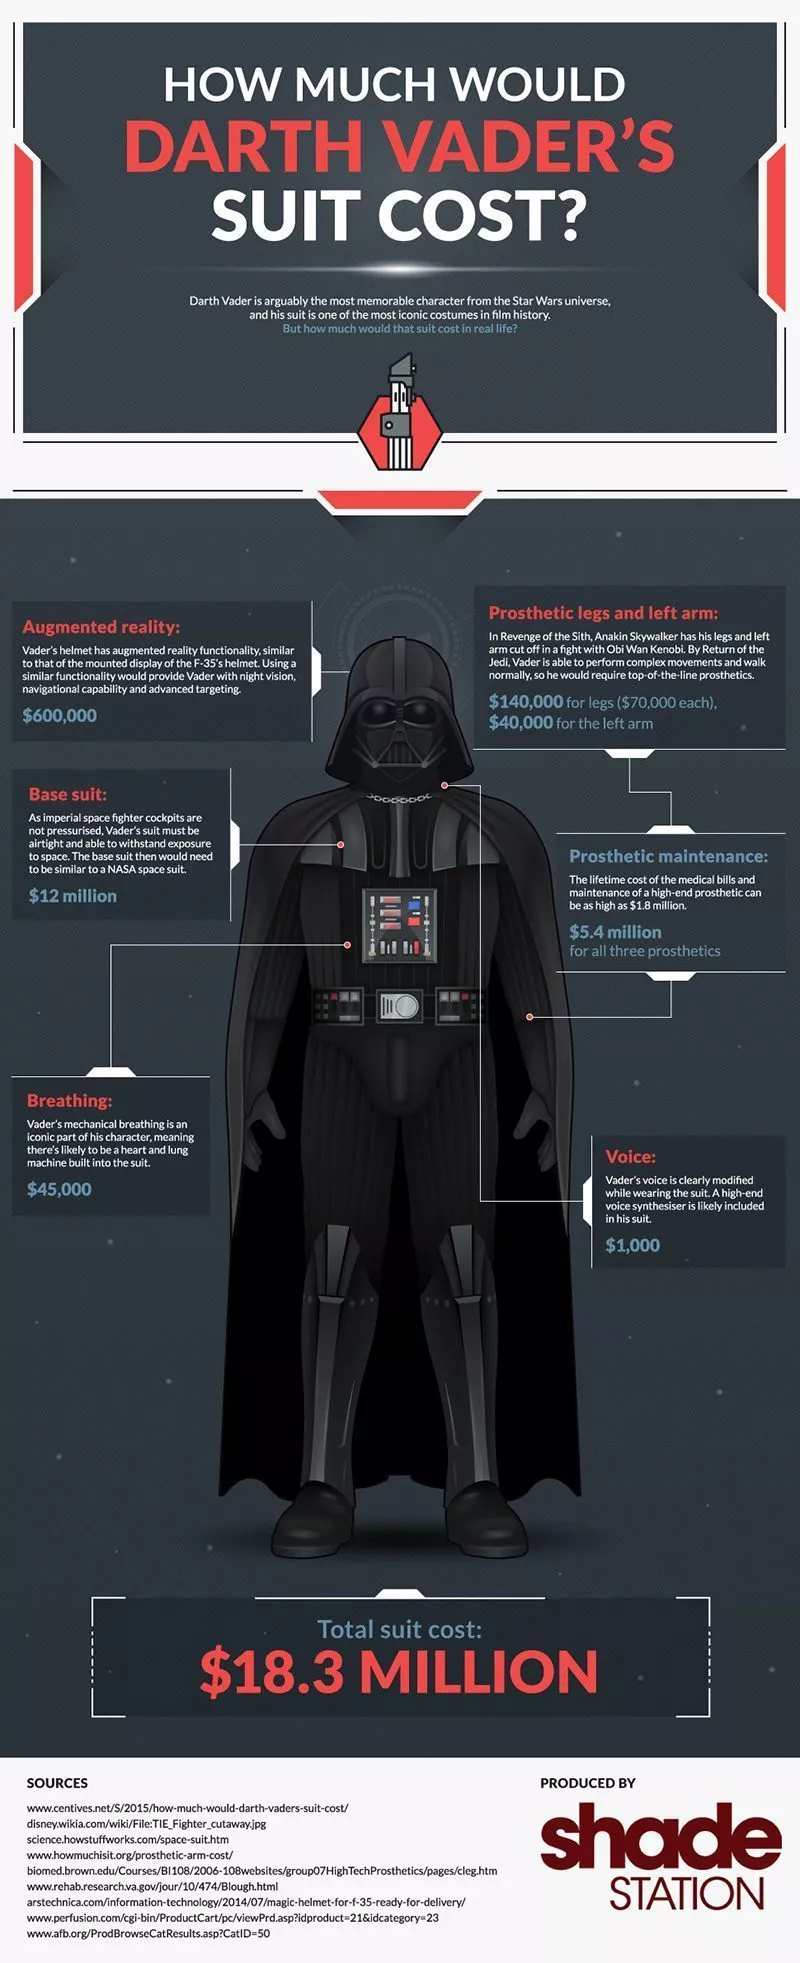 How Much Would Darth Vader's Suit Cost Infographic